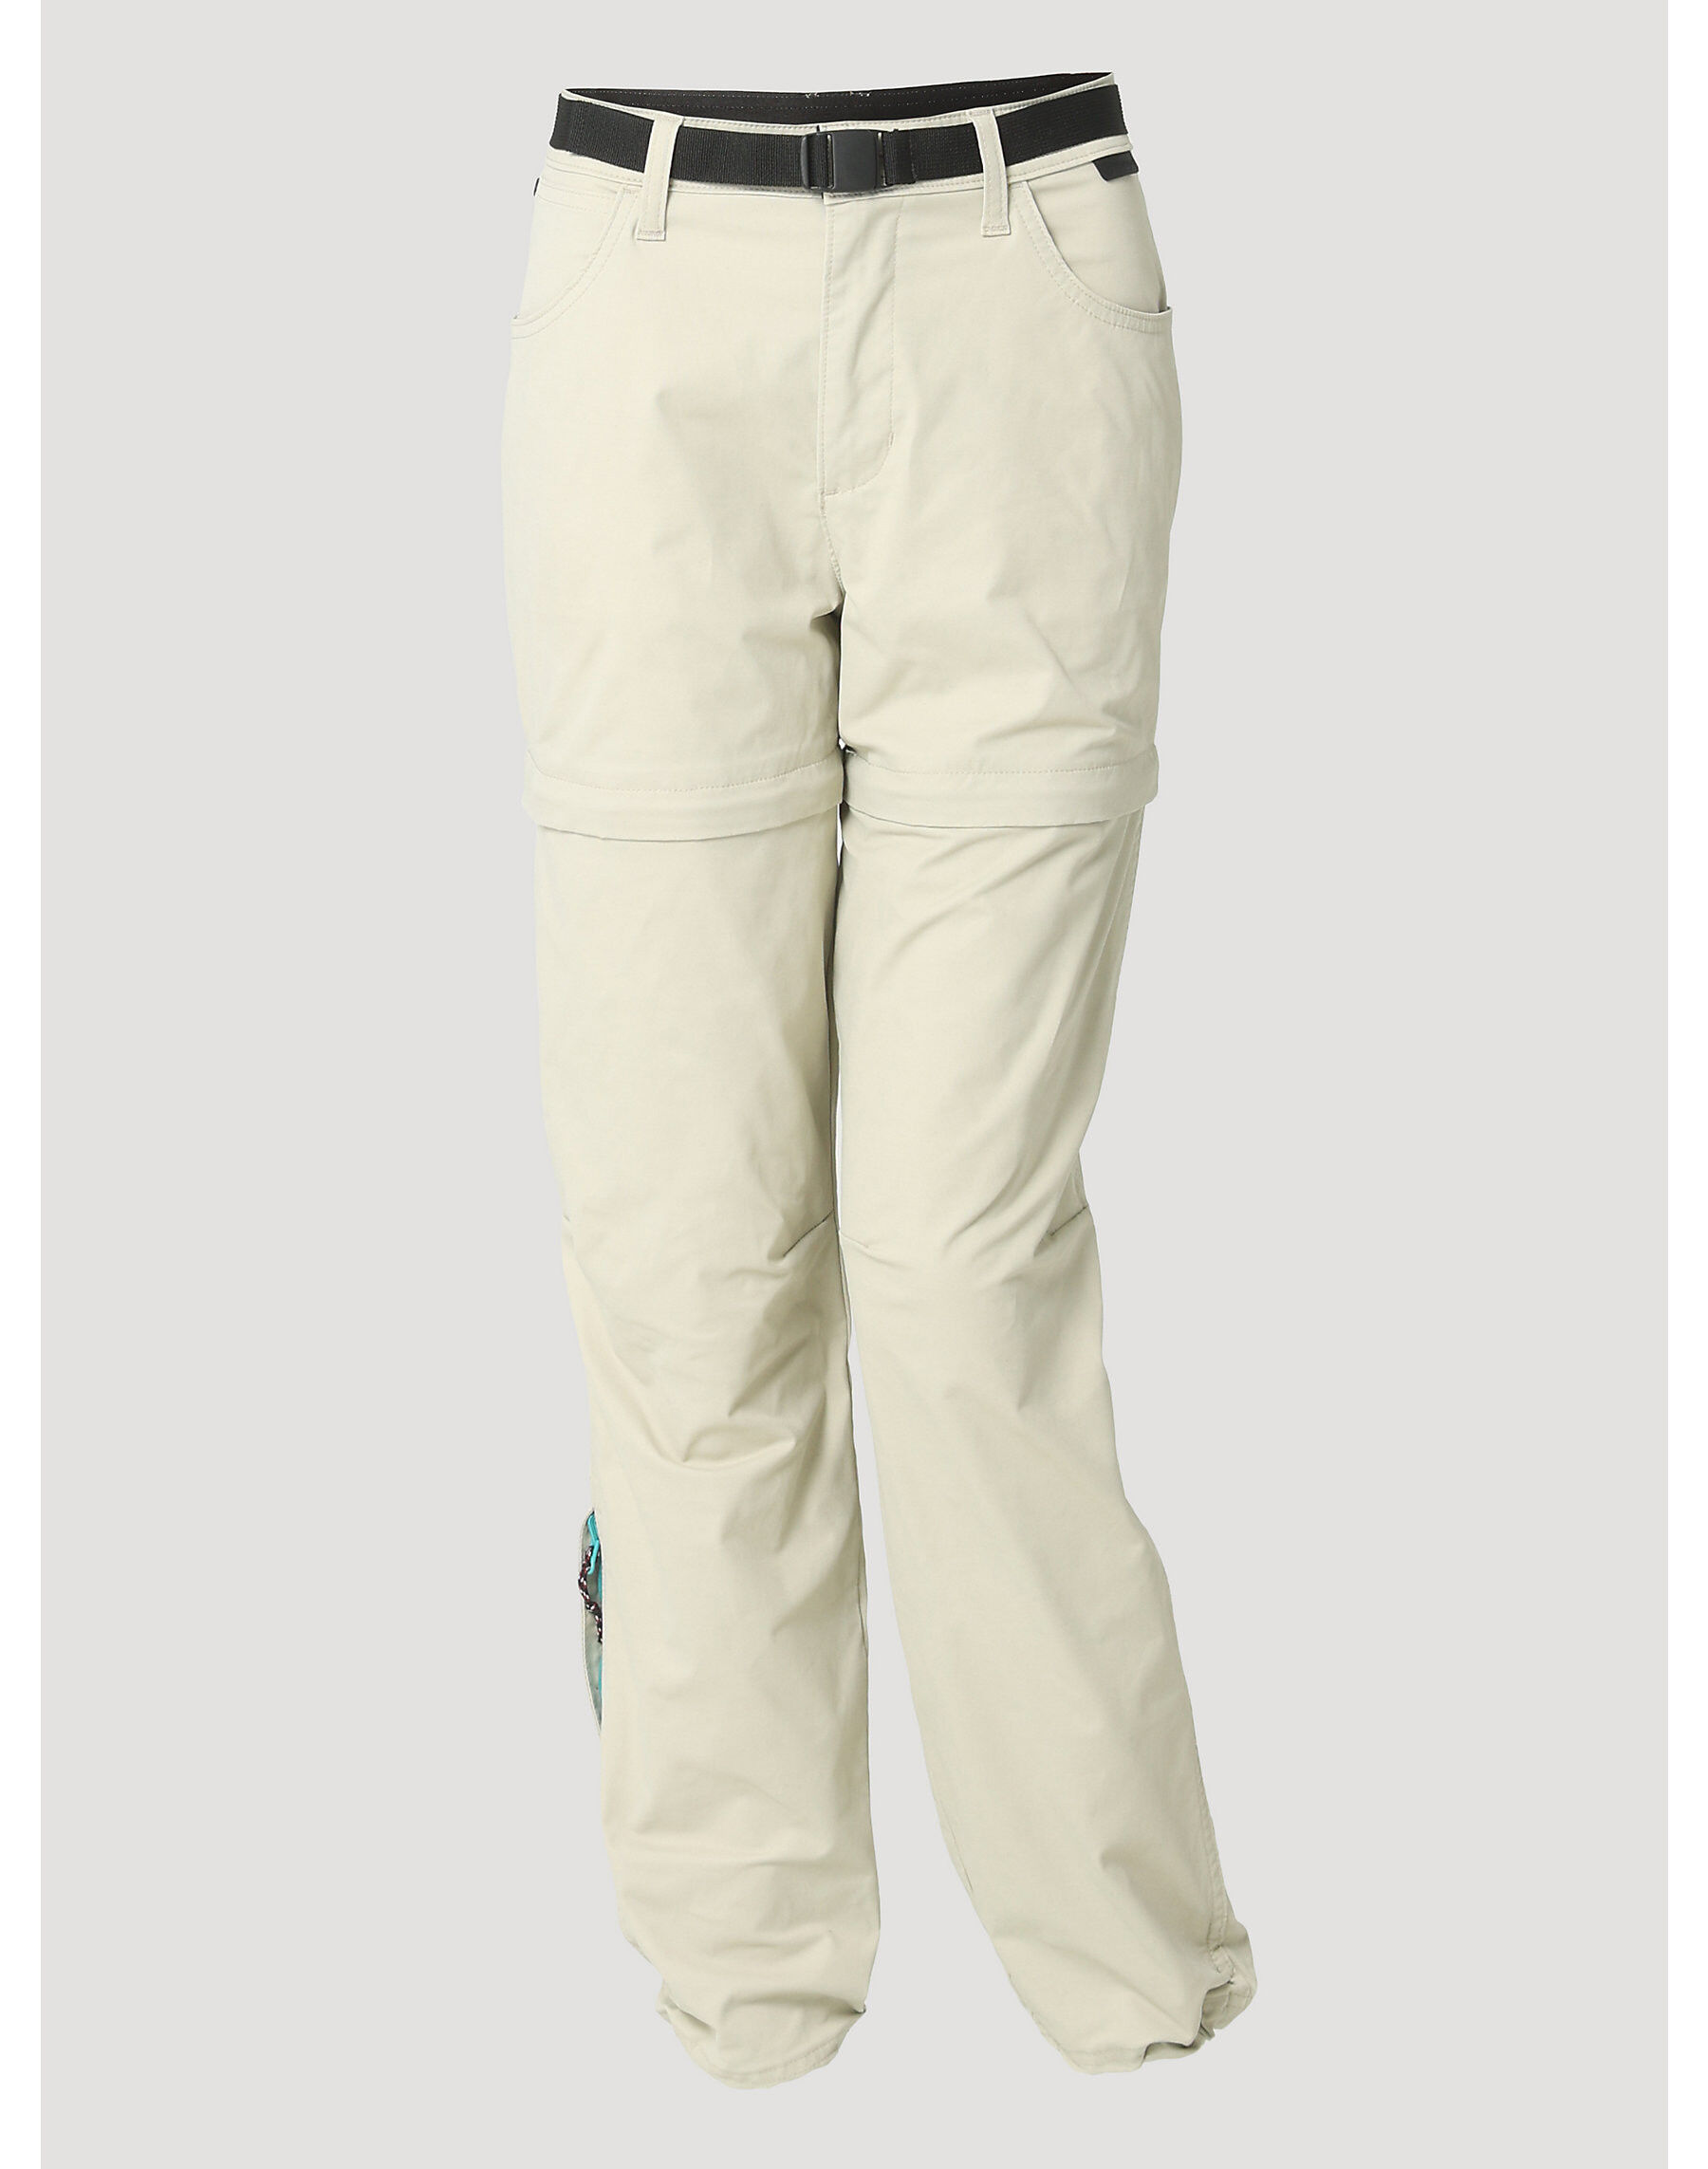 Ladies Zip Off Walking Trousers  Free UK Delivery  Cotswold Outdoor